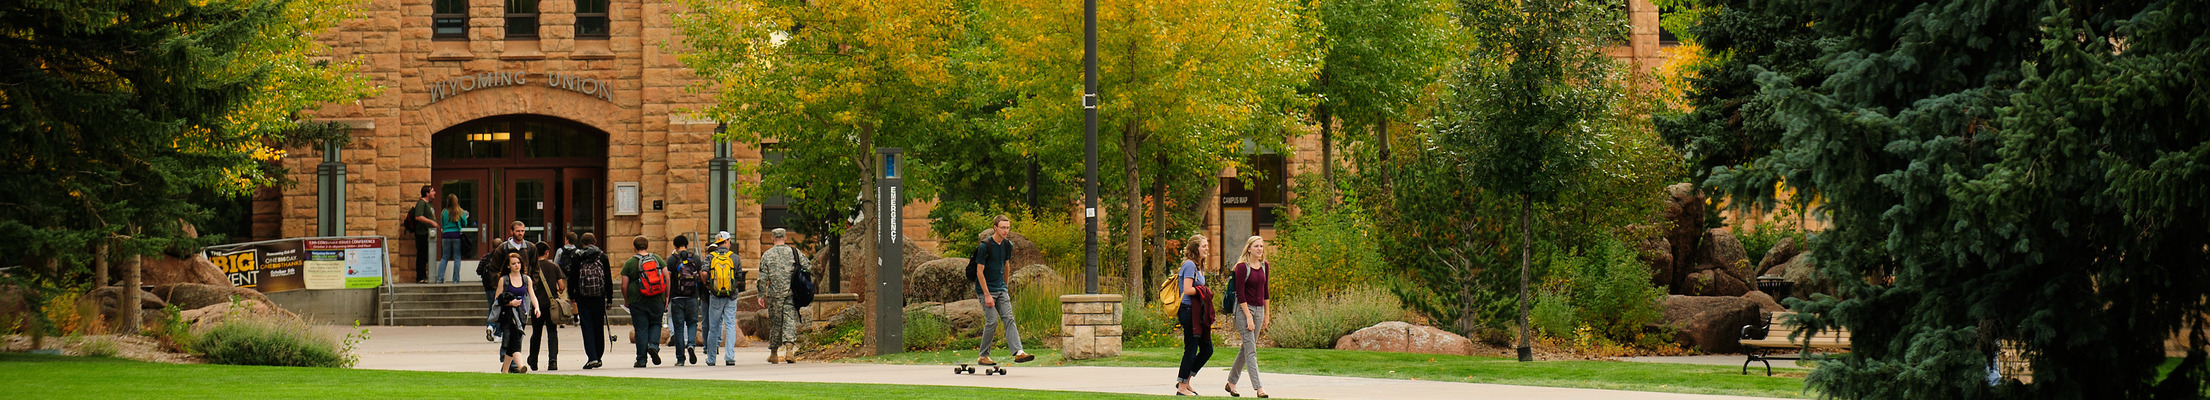 Students walking to and from the Union building in the fall 